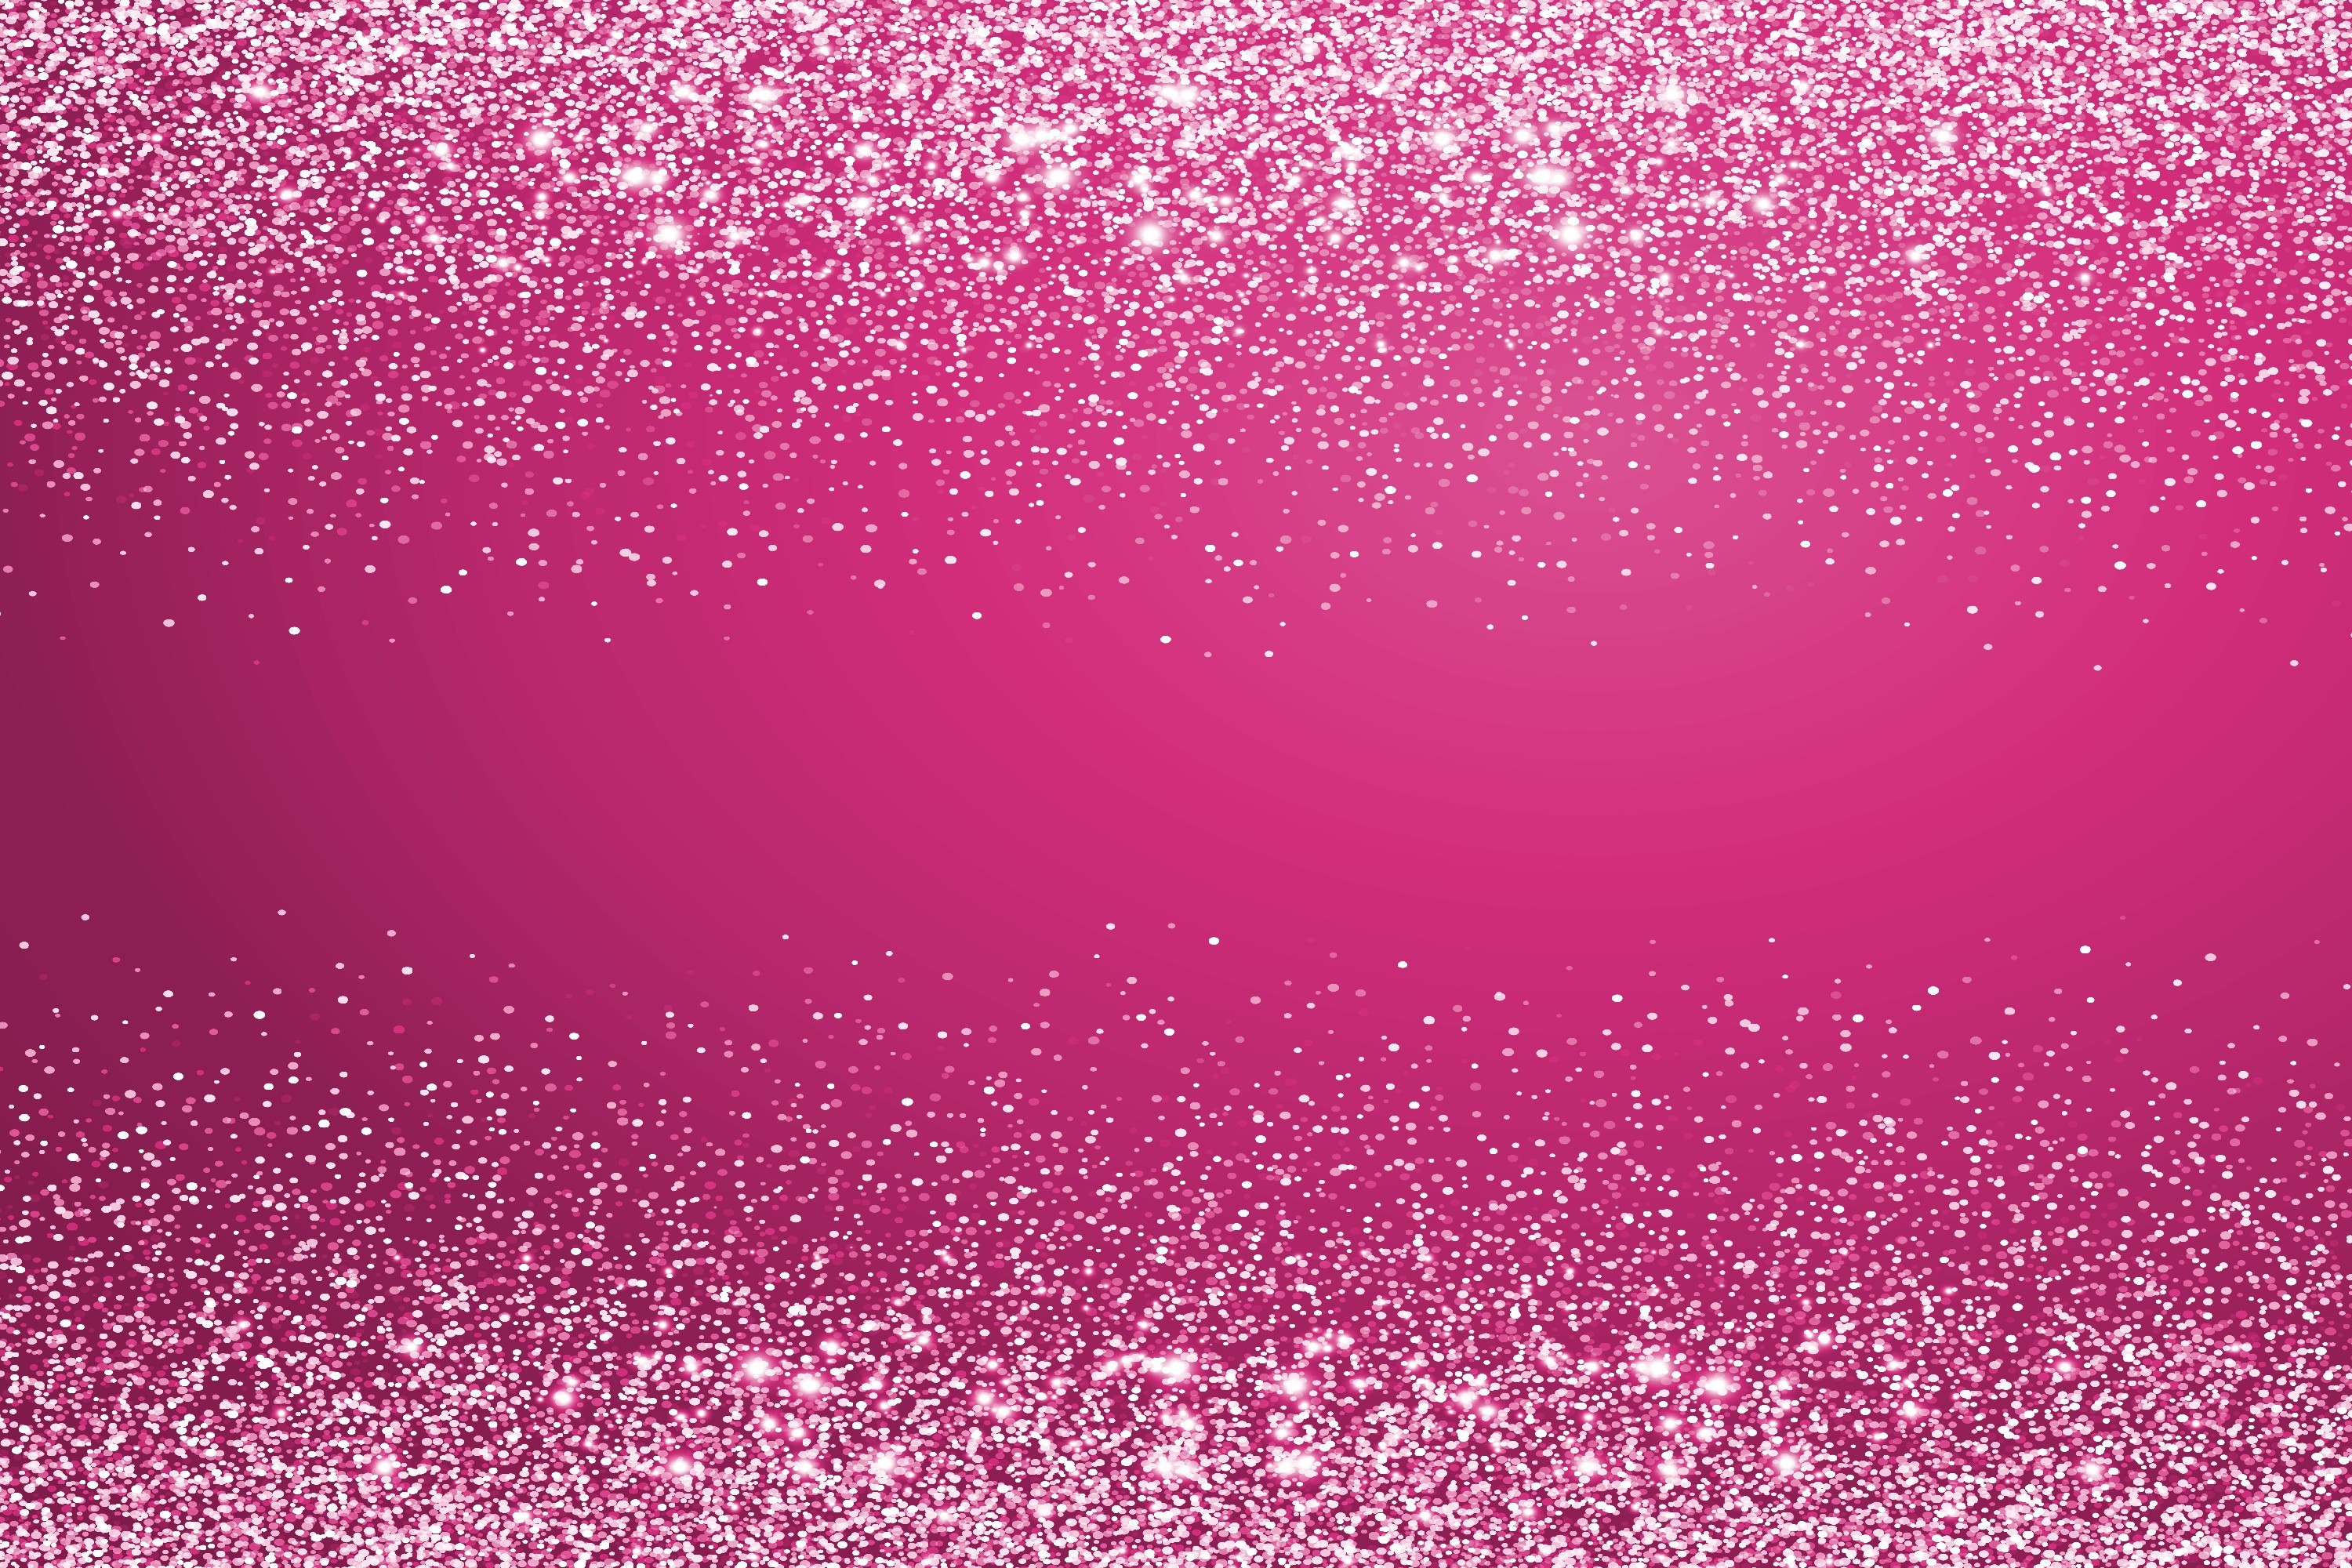 Shiny pink glitter textured background, free image by rawpixel.com / Teddy  Rawpixel